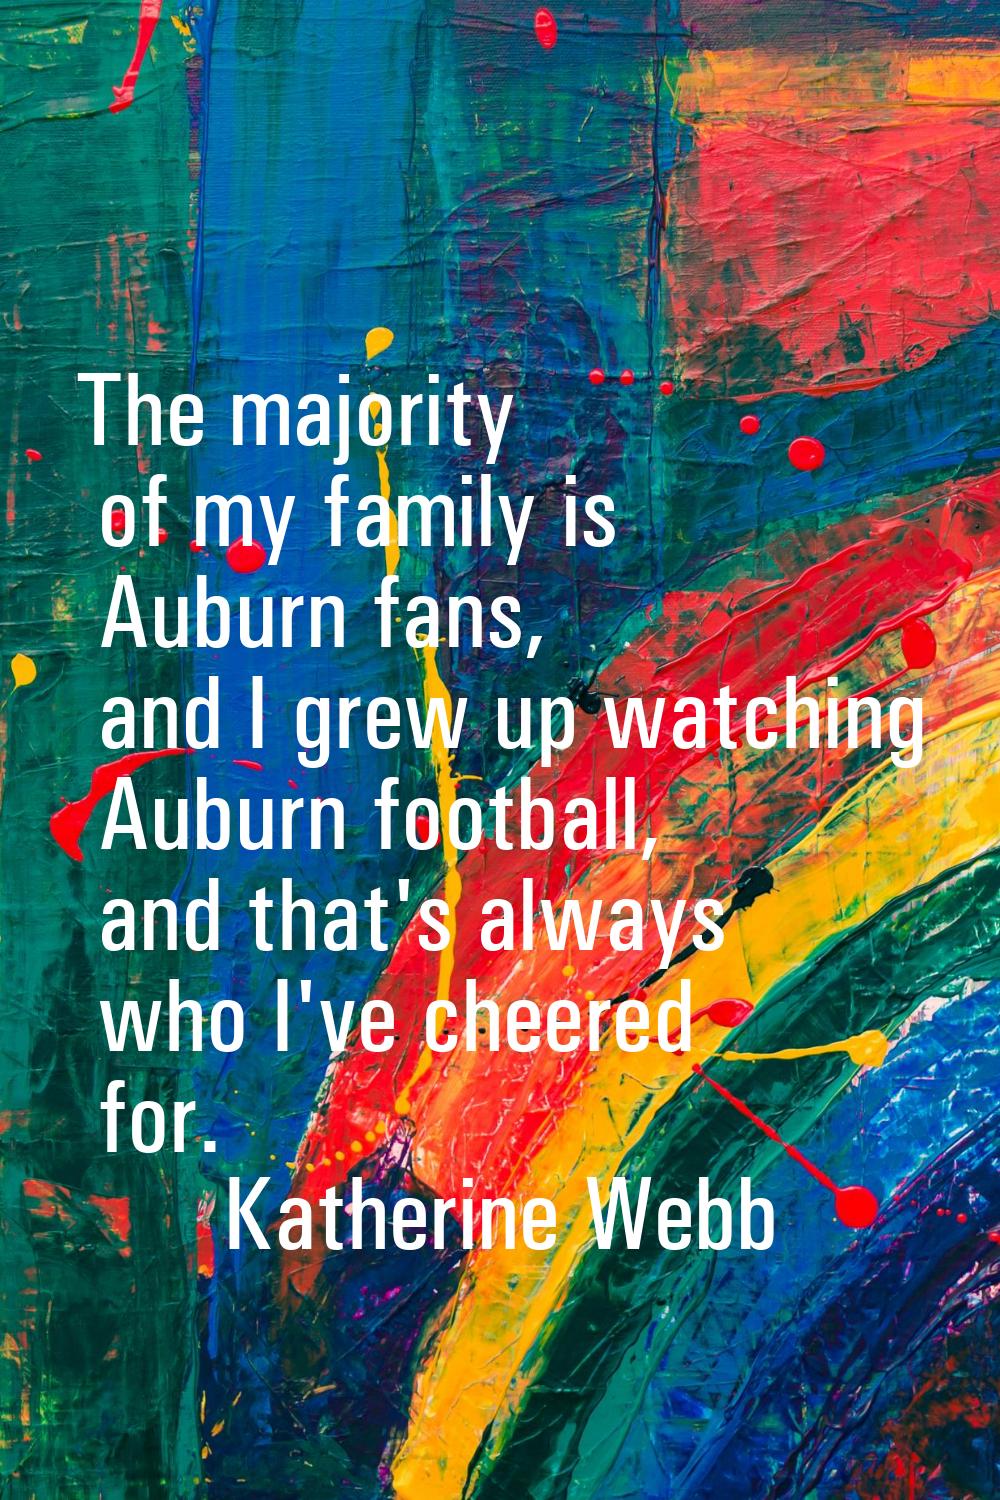 The majority of my family is Auburn fans, and I grew up watching Auburn football, and that's always